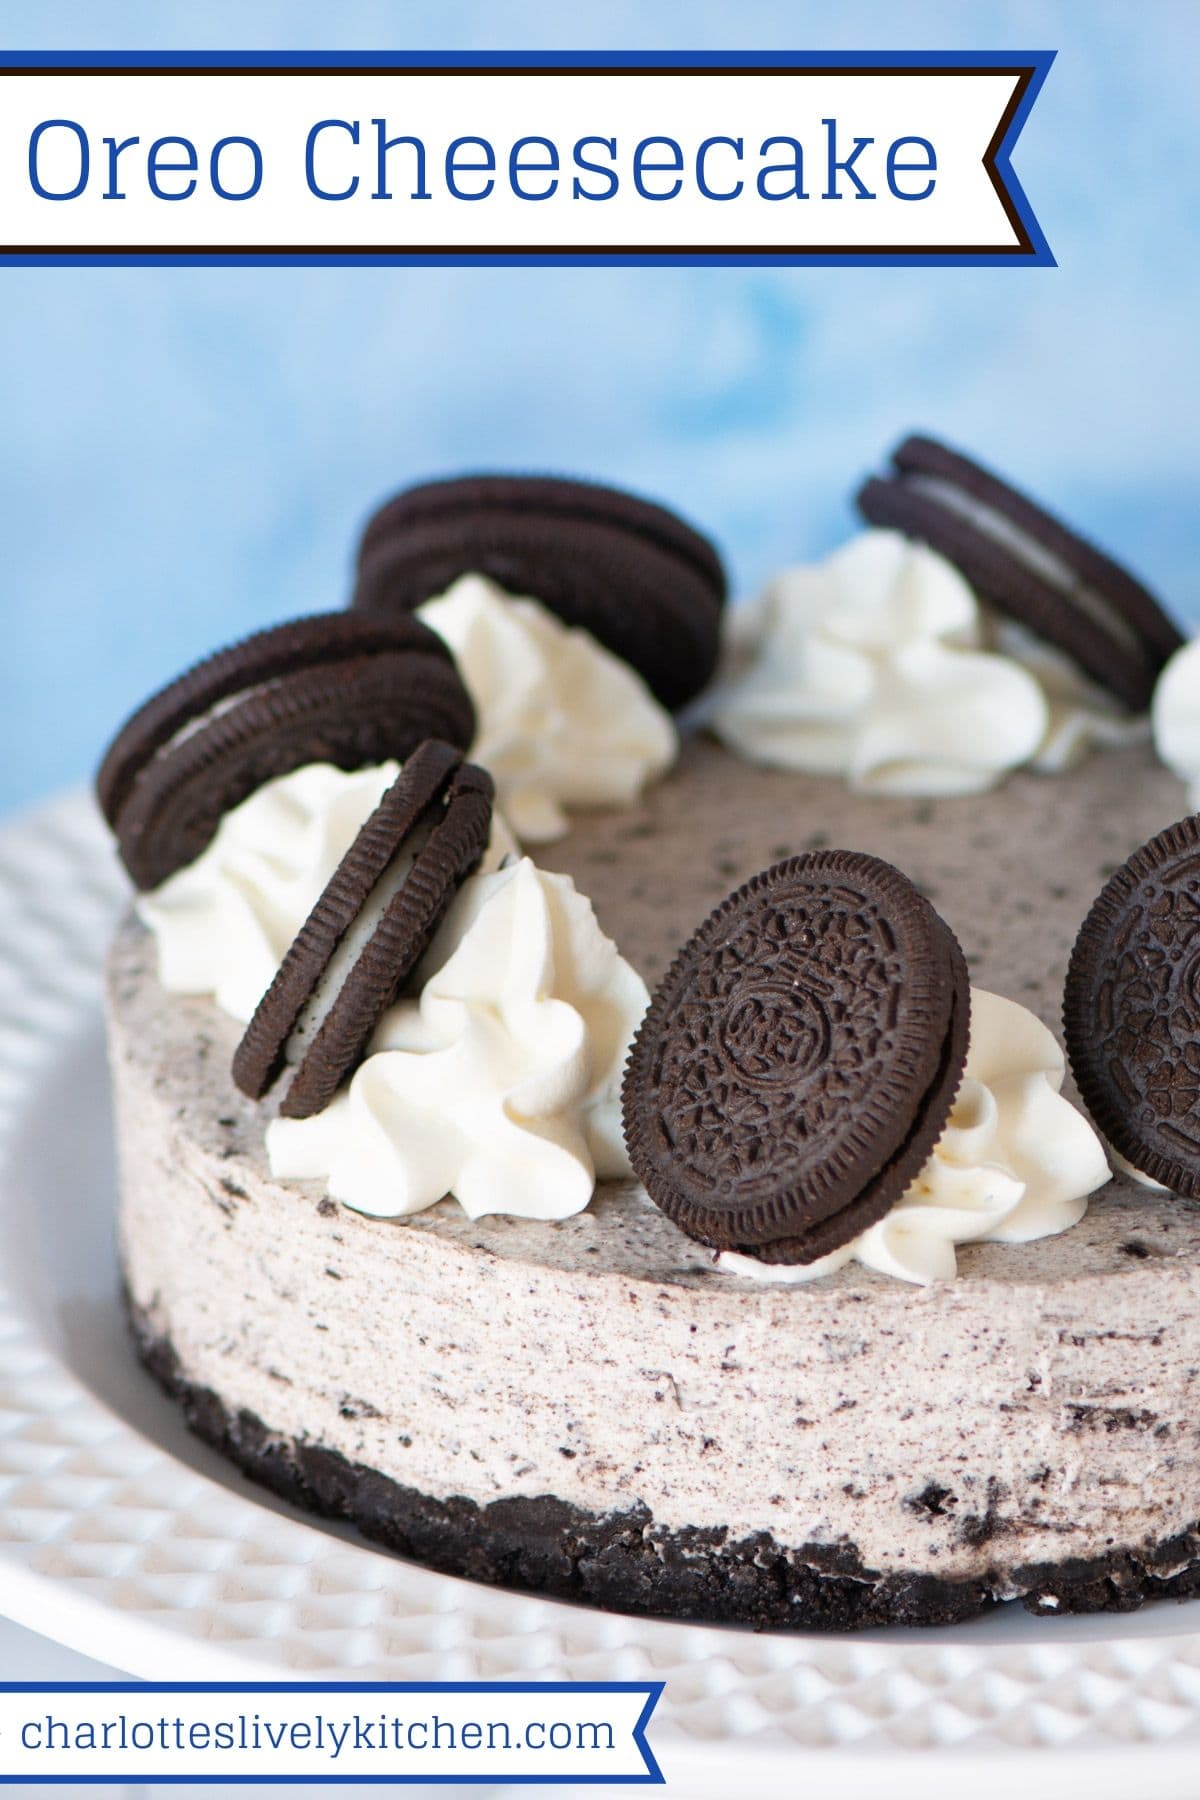 A no-bake Oreo cheesecake topped with swirls of whipped cream and Oreos, on a white cake stand.